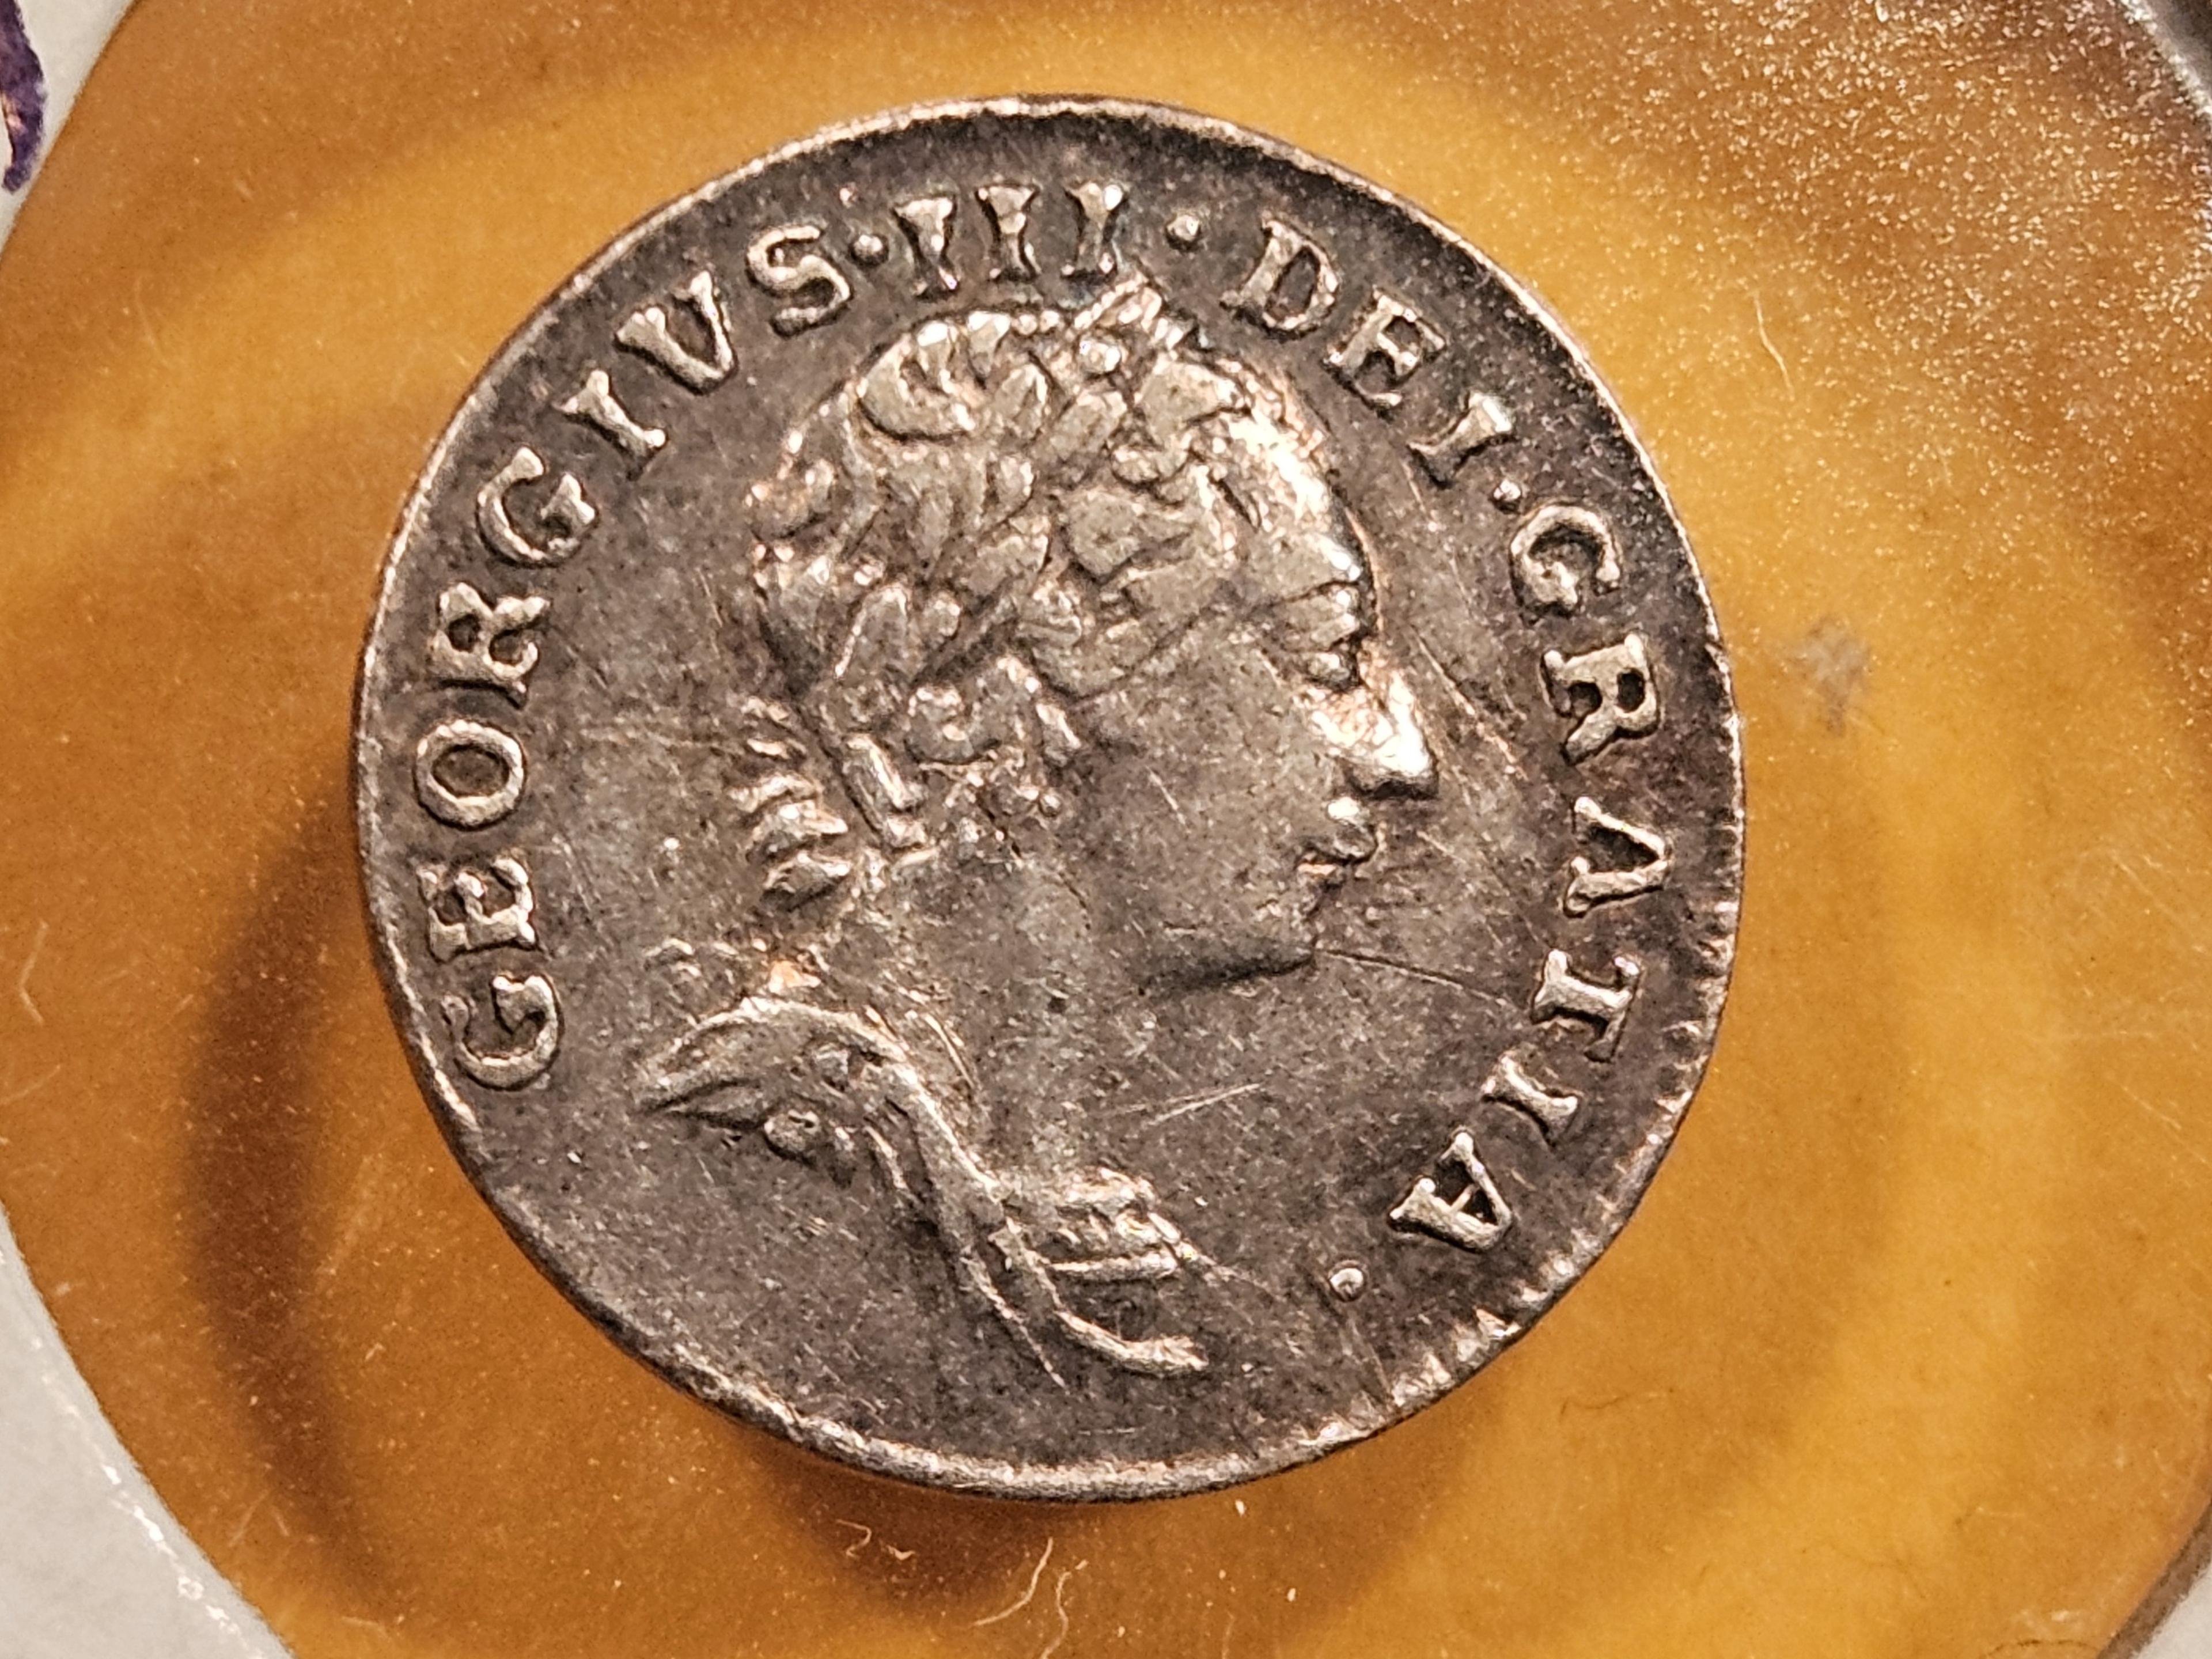 1784 Great Britain silver 1 pence